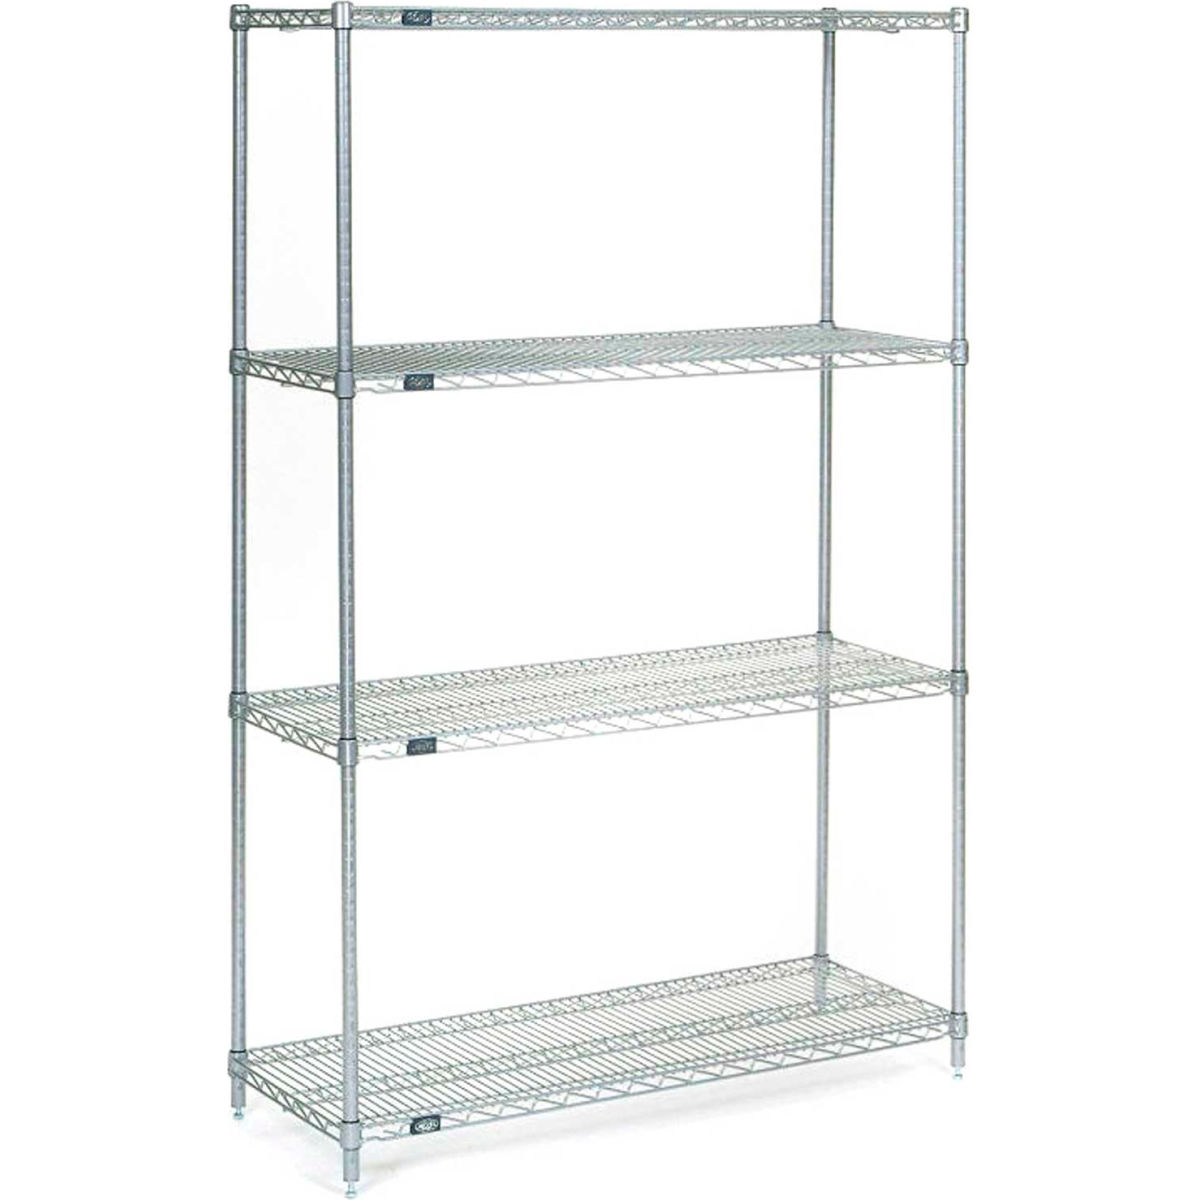 Picture of Global Industrial 14365S 54 x 36 x 14 in. Nexel Stainless Steel Starter Wire Shelving